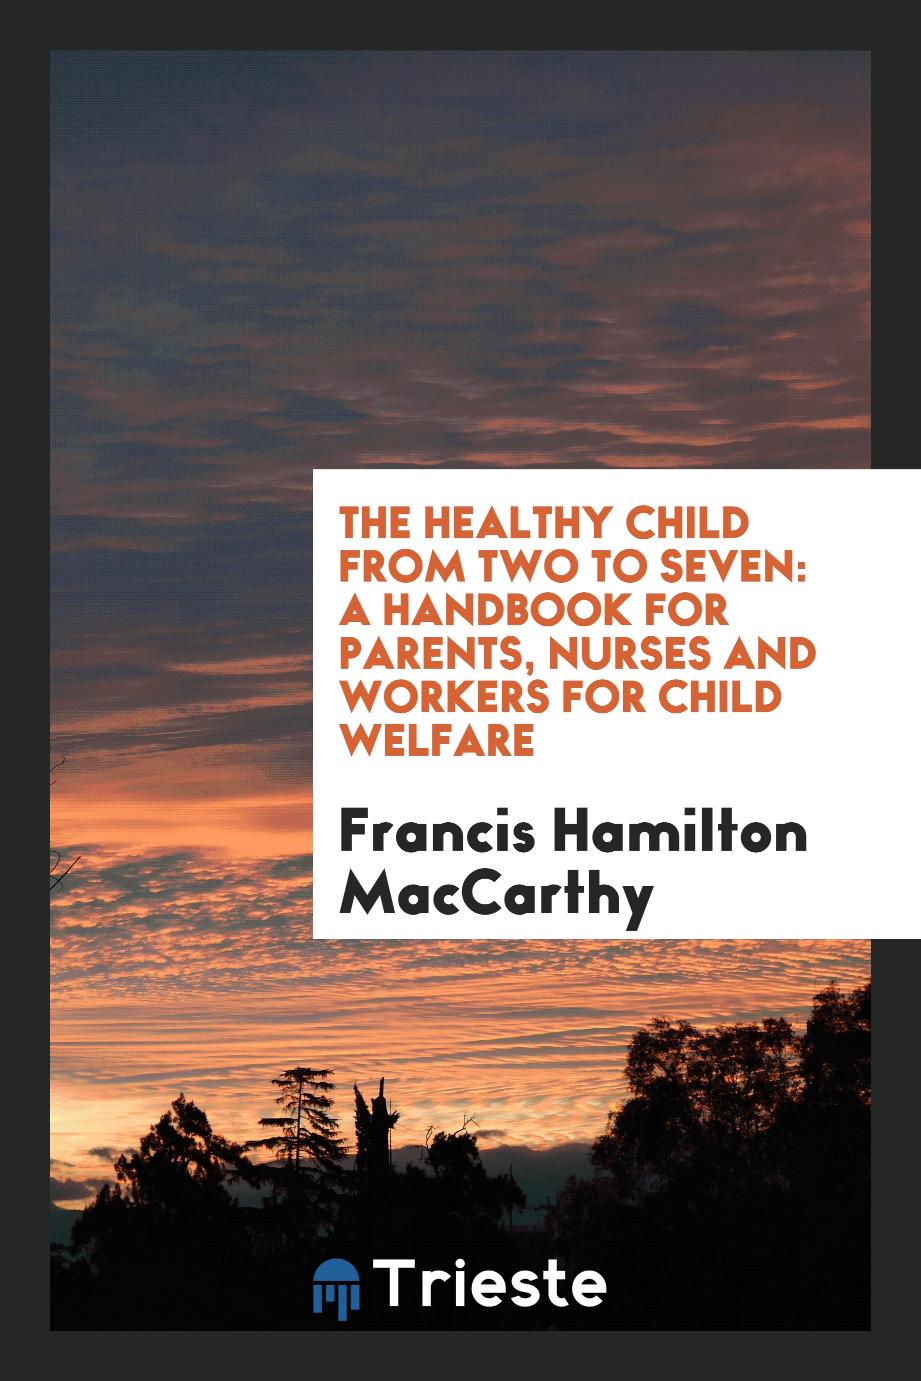 The healthy child from two to seven: a handbook for parents, nurses and workers for child welfare